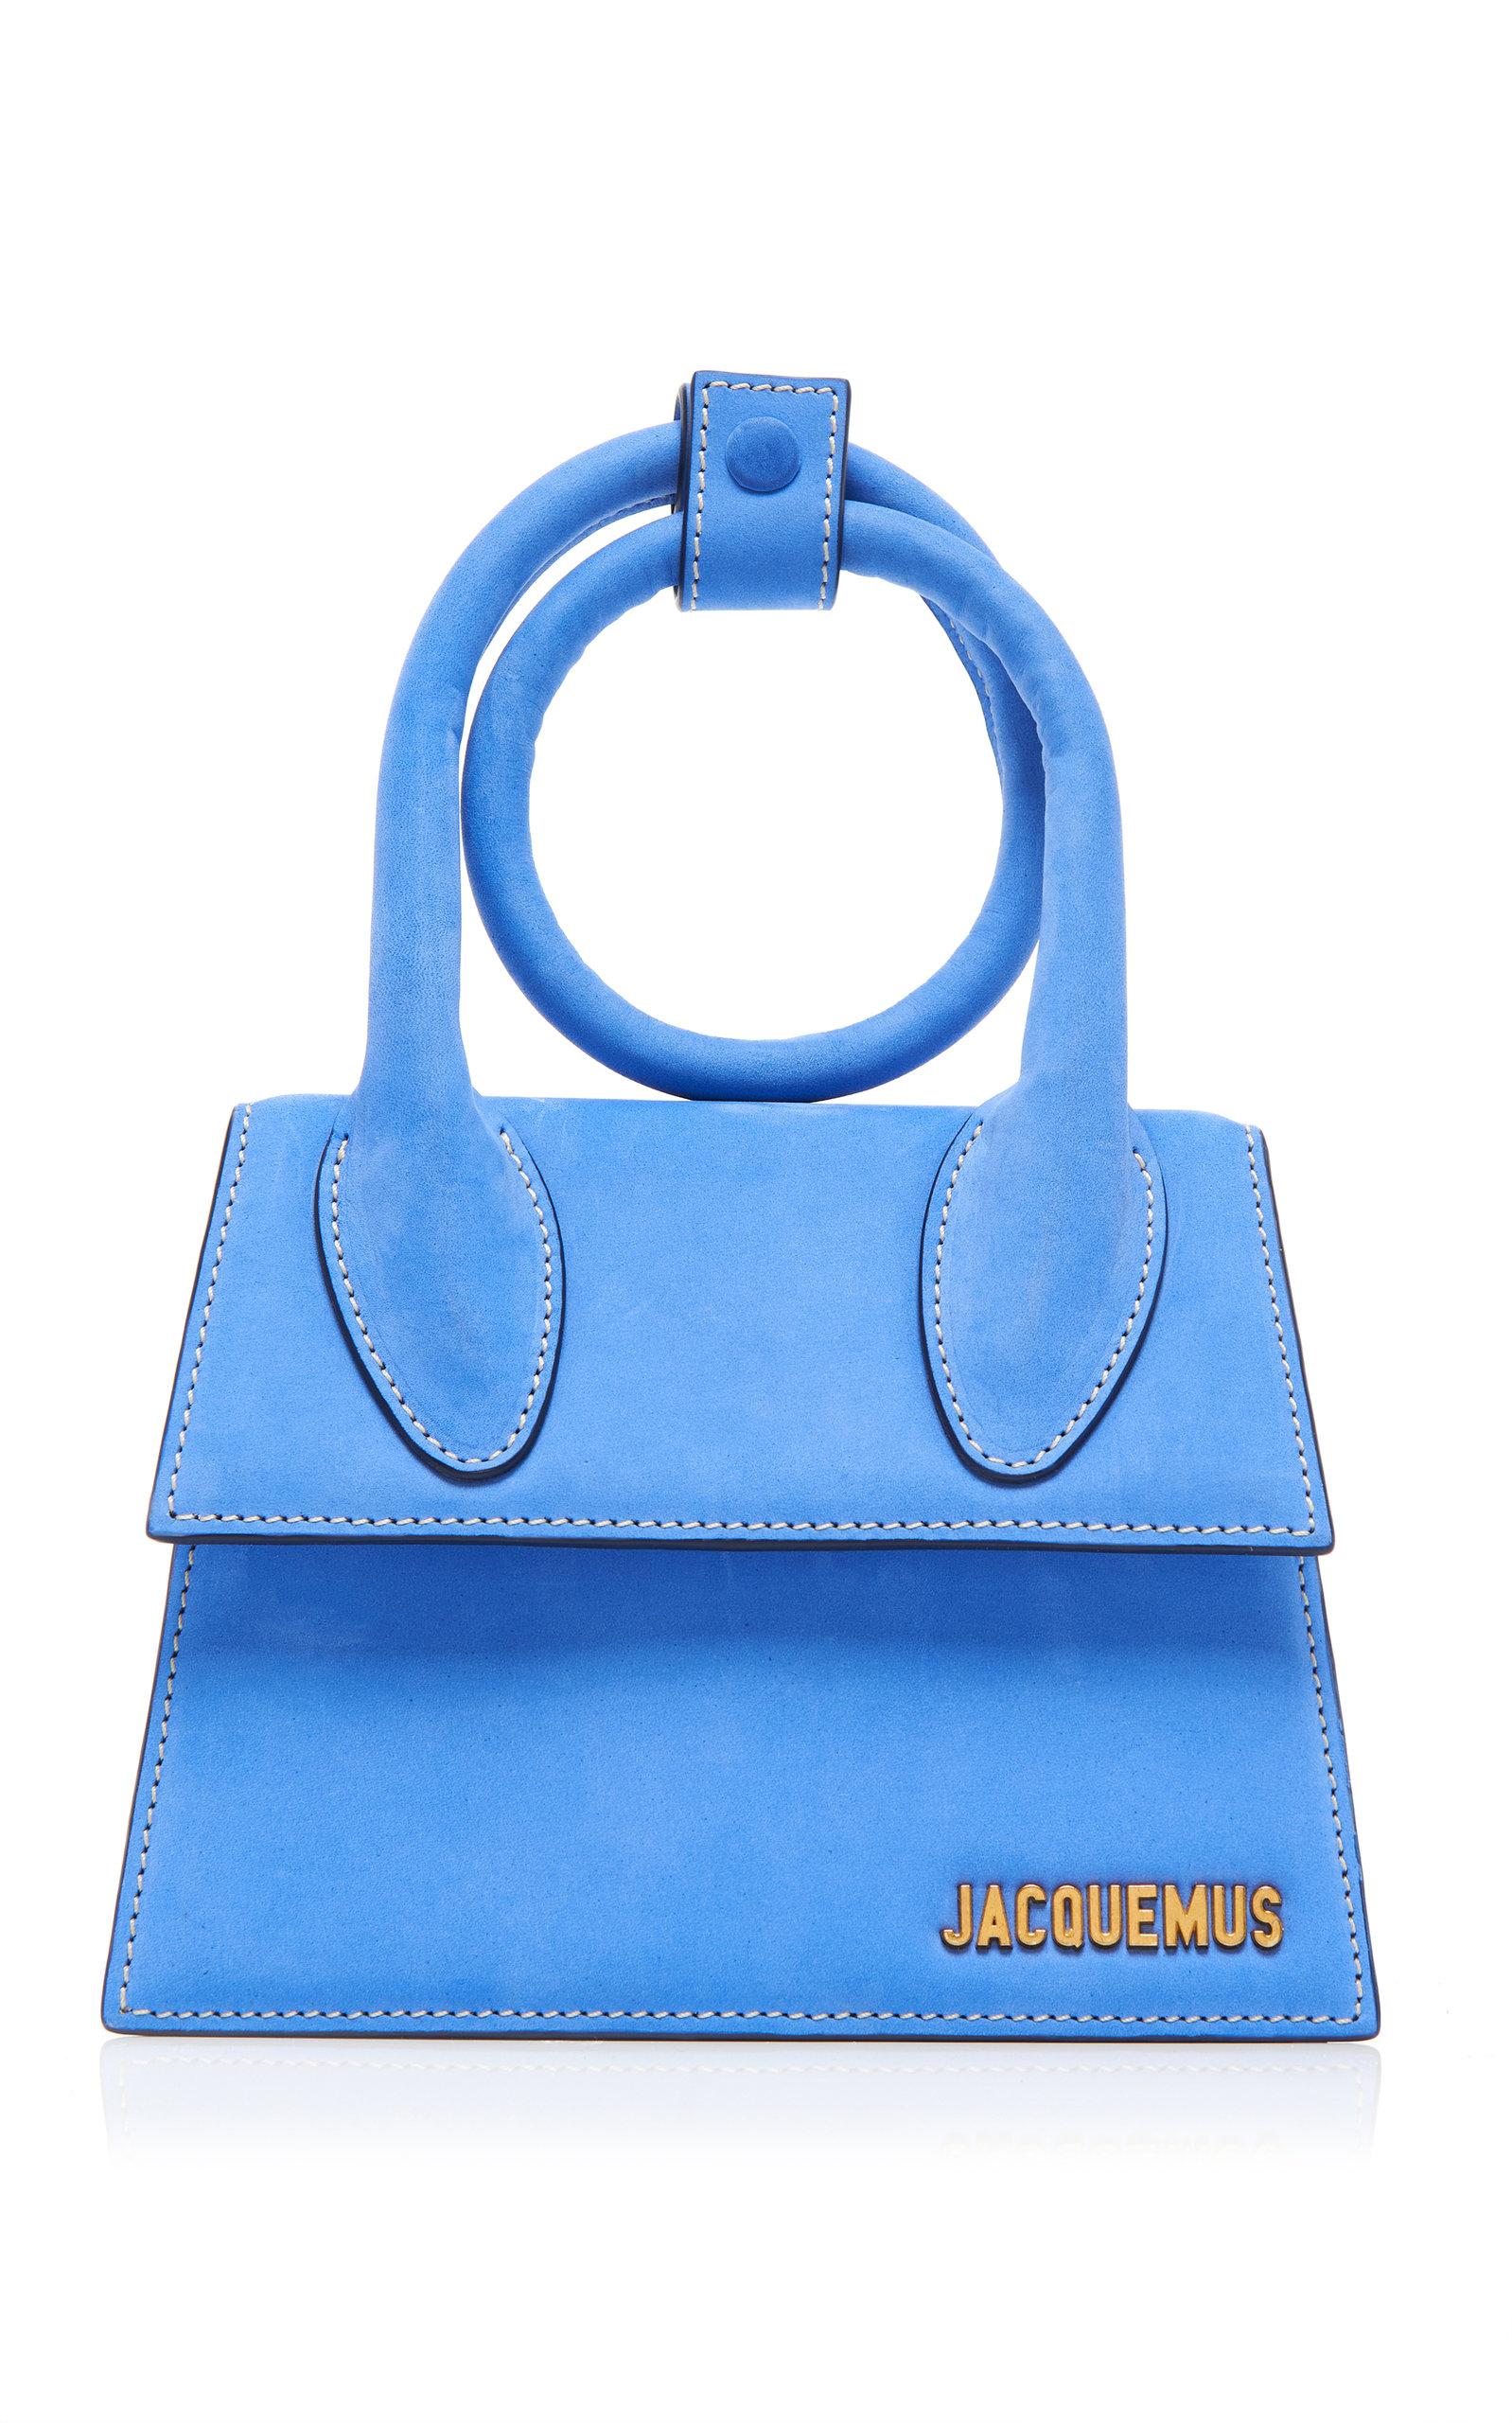 Jacquemus Le Chiquito Noeud Leather Bag in Blue | Lyst Canada